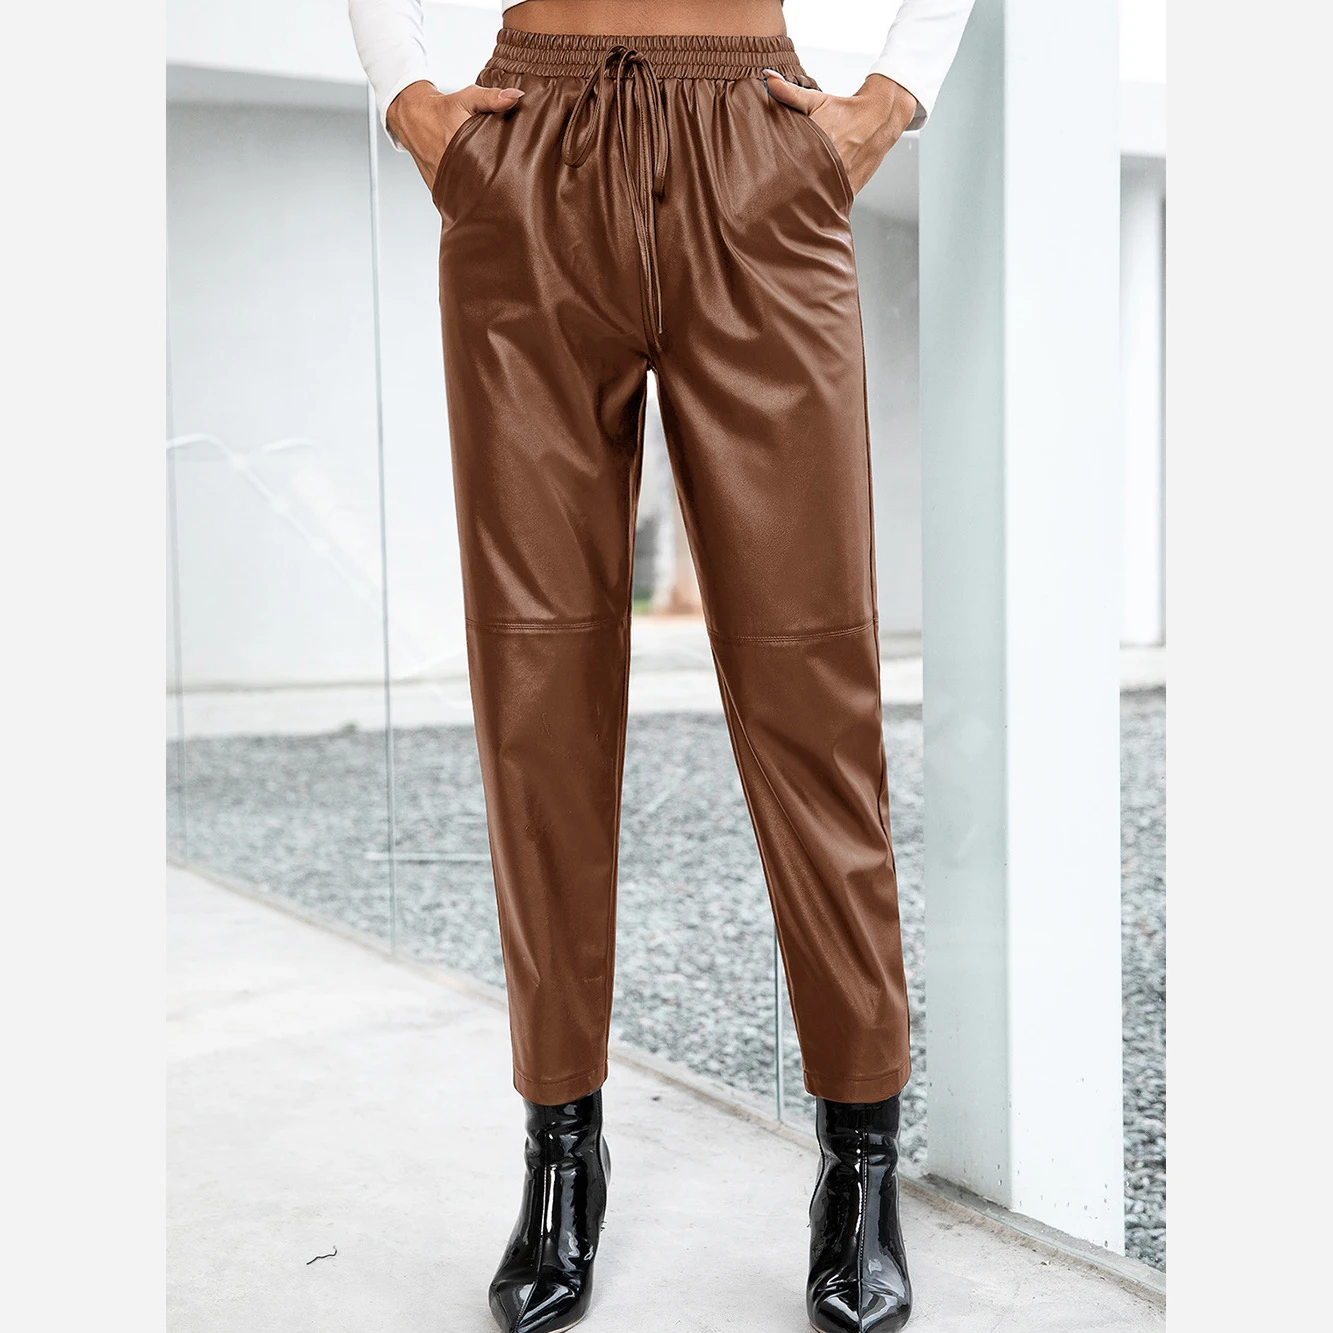 High Waist Spliced Loose Leather Pants Women Autumn Solid Drawstring PU Leather Trousers Women Straight Pants Female 2021